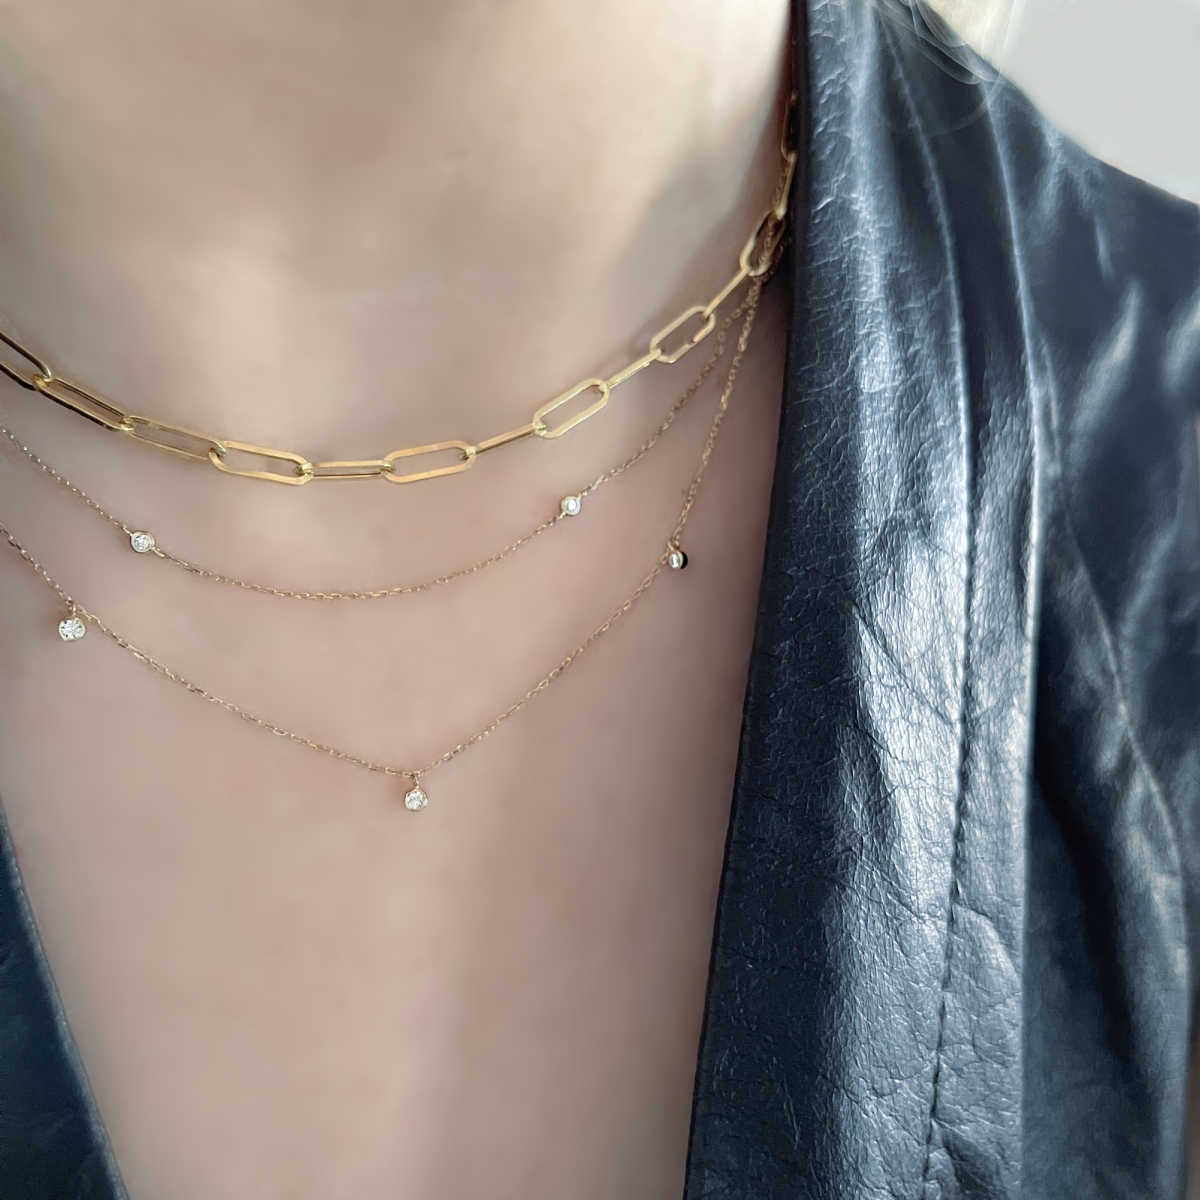 Diamond Dangle Necklace | Diamonds by the Yard Style Dainty Gold Necklace | 14k Gold Layered Necklaces from Two of Most